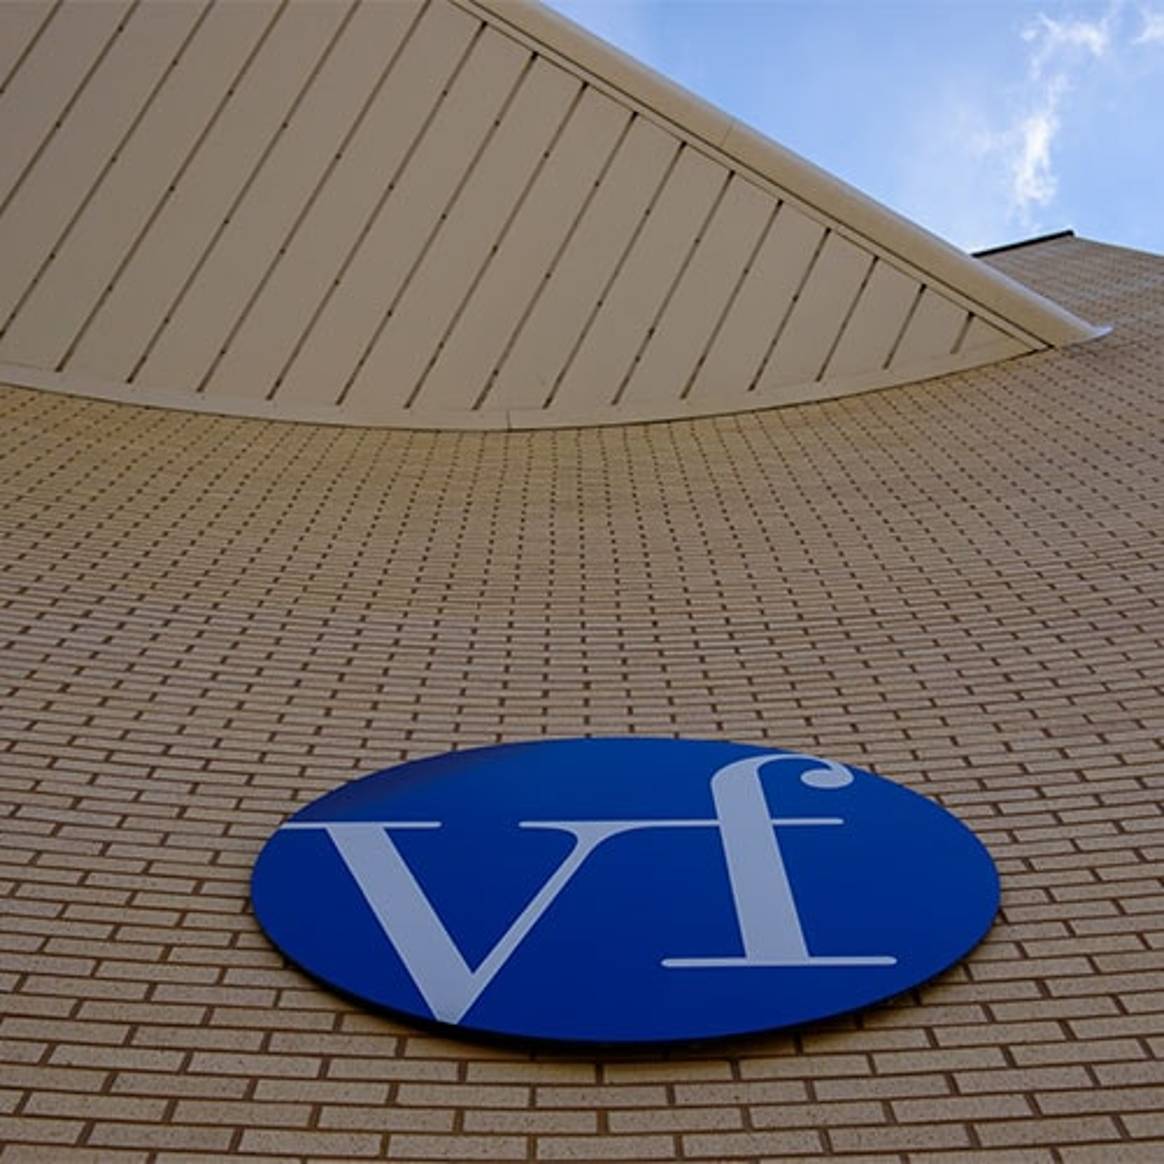 VF jobs - working at VF